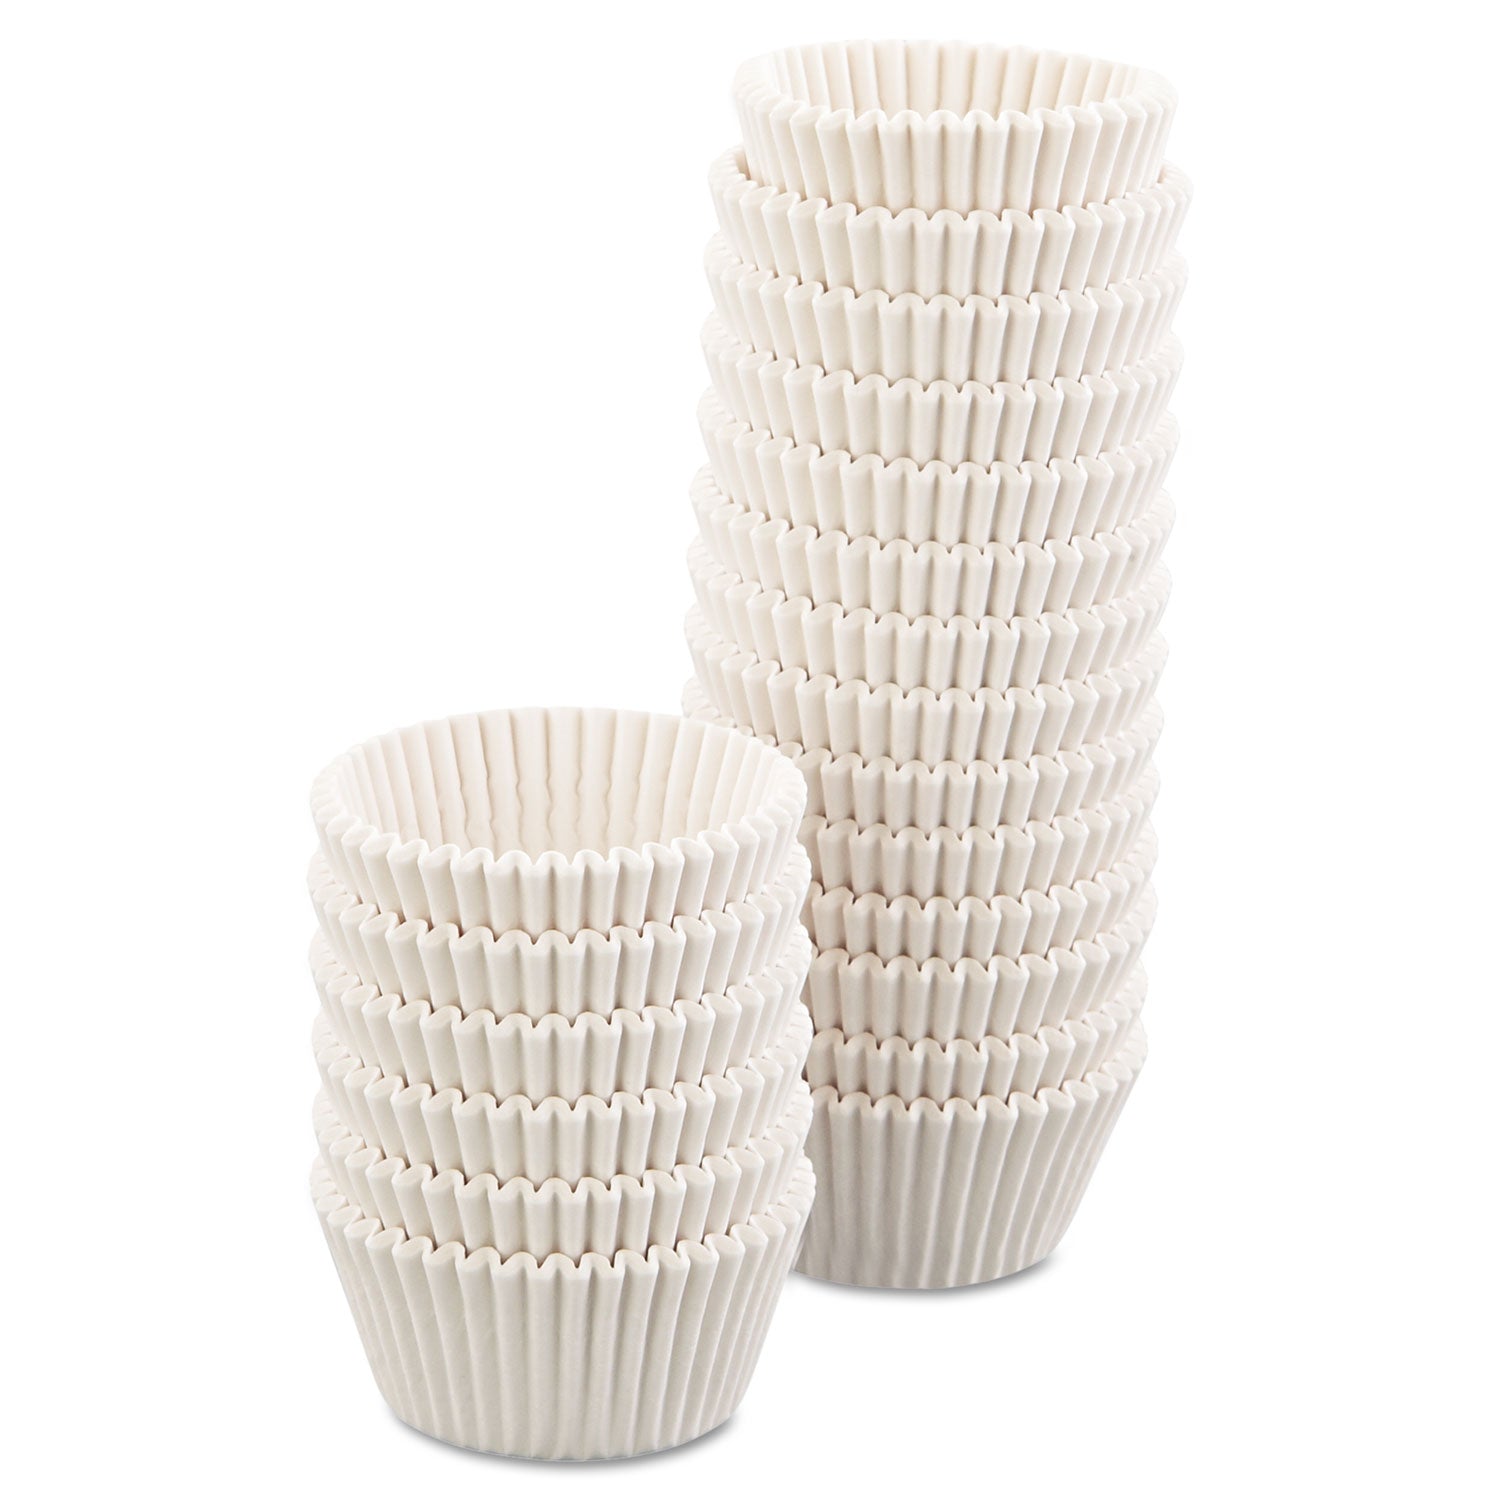 Fluted Bake Cups, 4.5 Diameter x 1.25 h, White, Paper, 500/Pack, 20 Packs/Carton - 